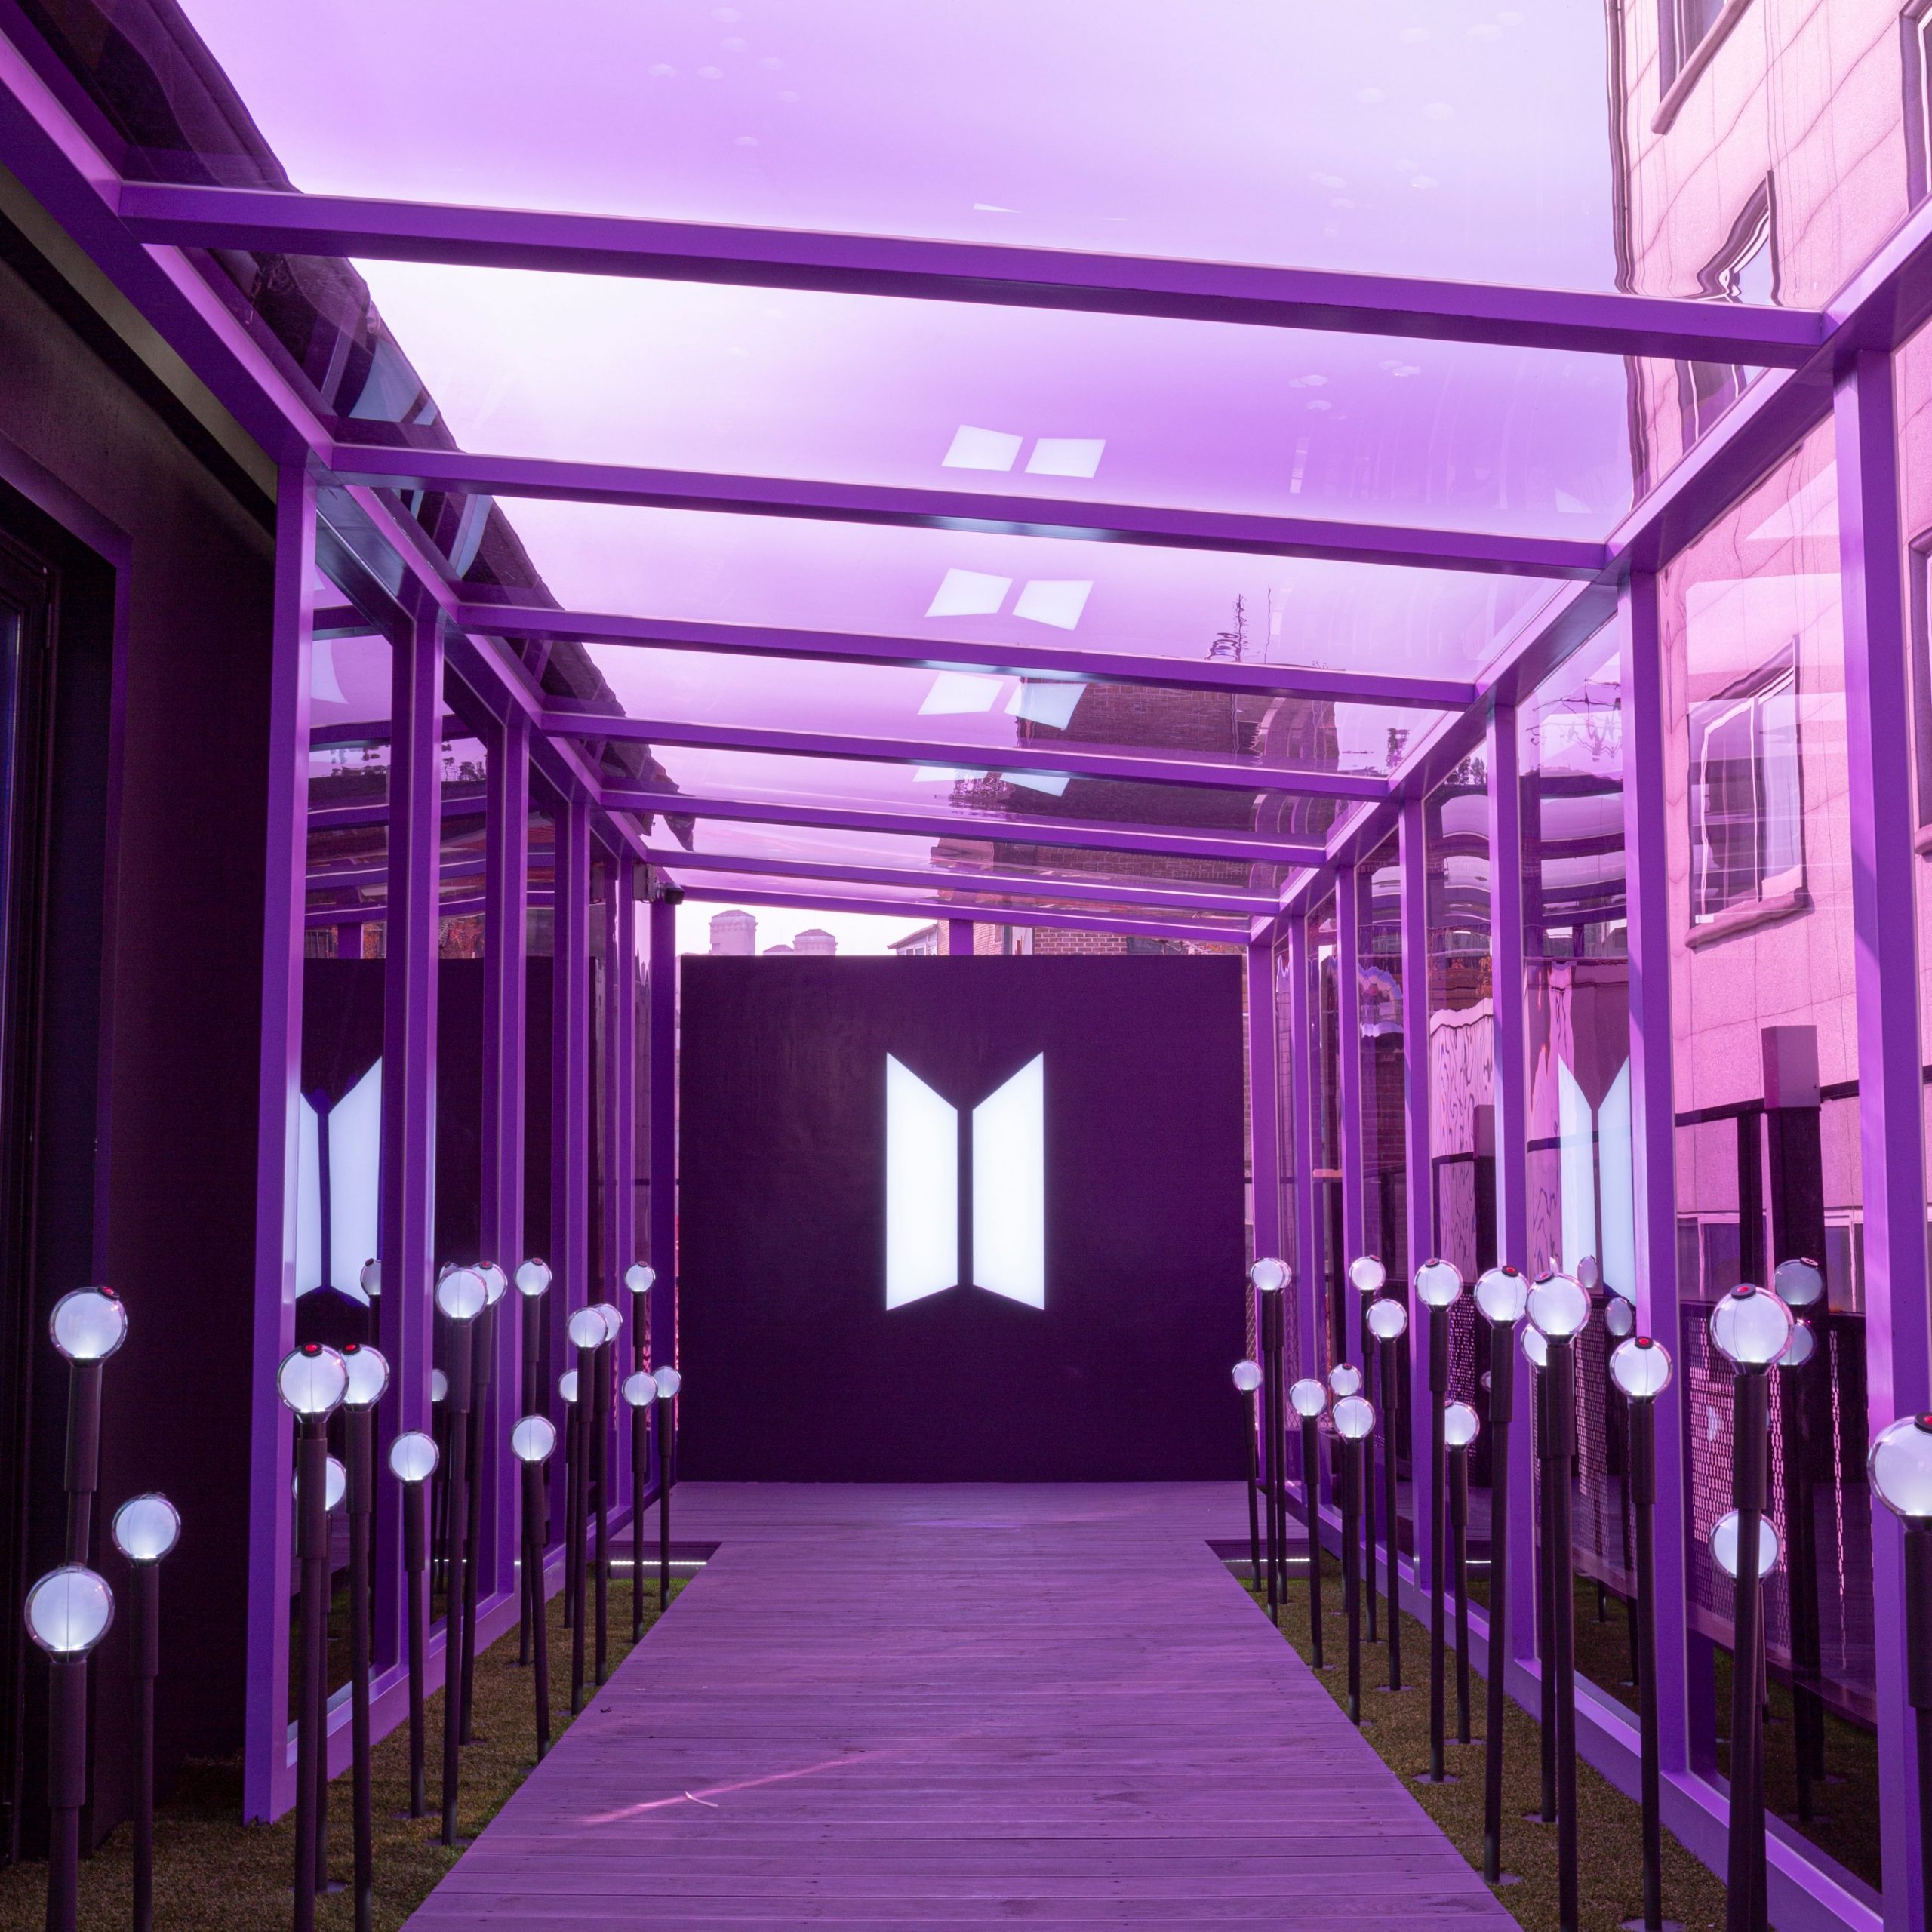 BTS pop-up store to open at Plaza Singapura from Nov. 14 